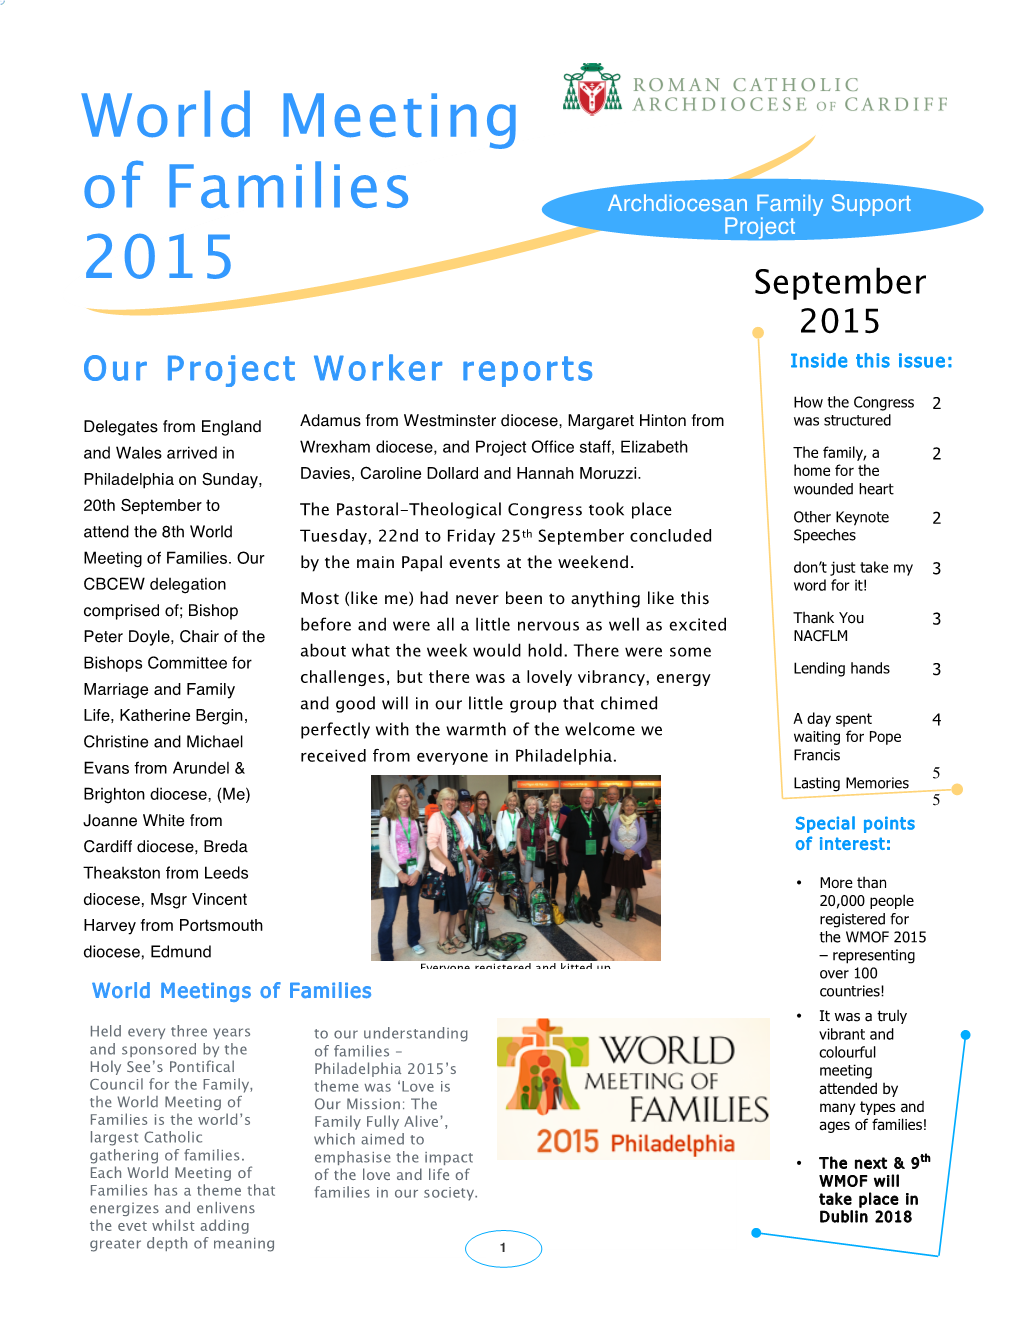 World Meeting of Families 2015